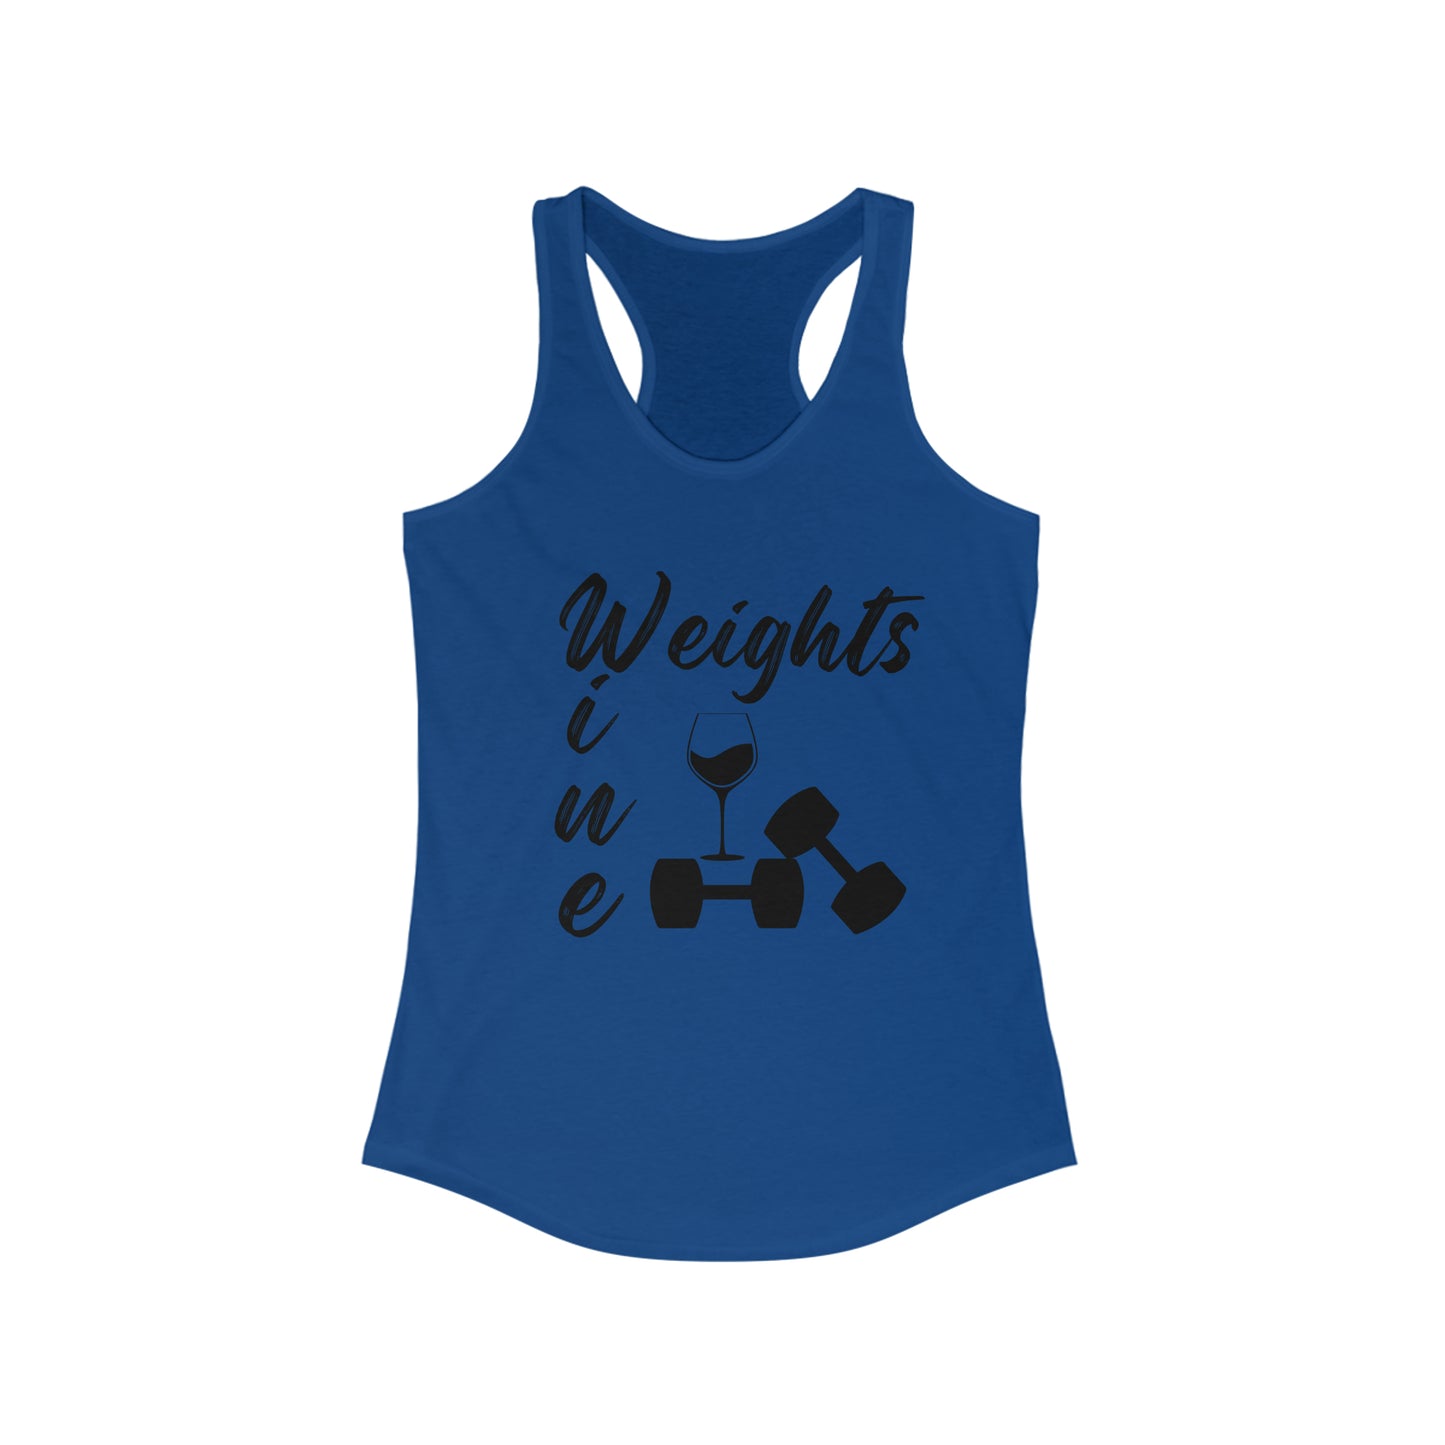 Weights and Wine Racerback Tank Top